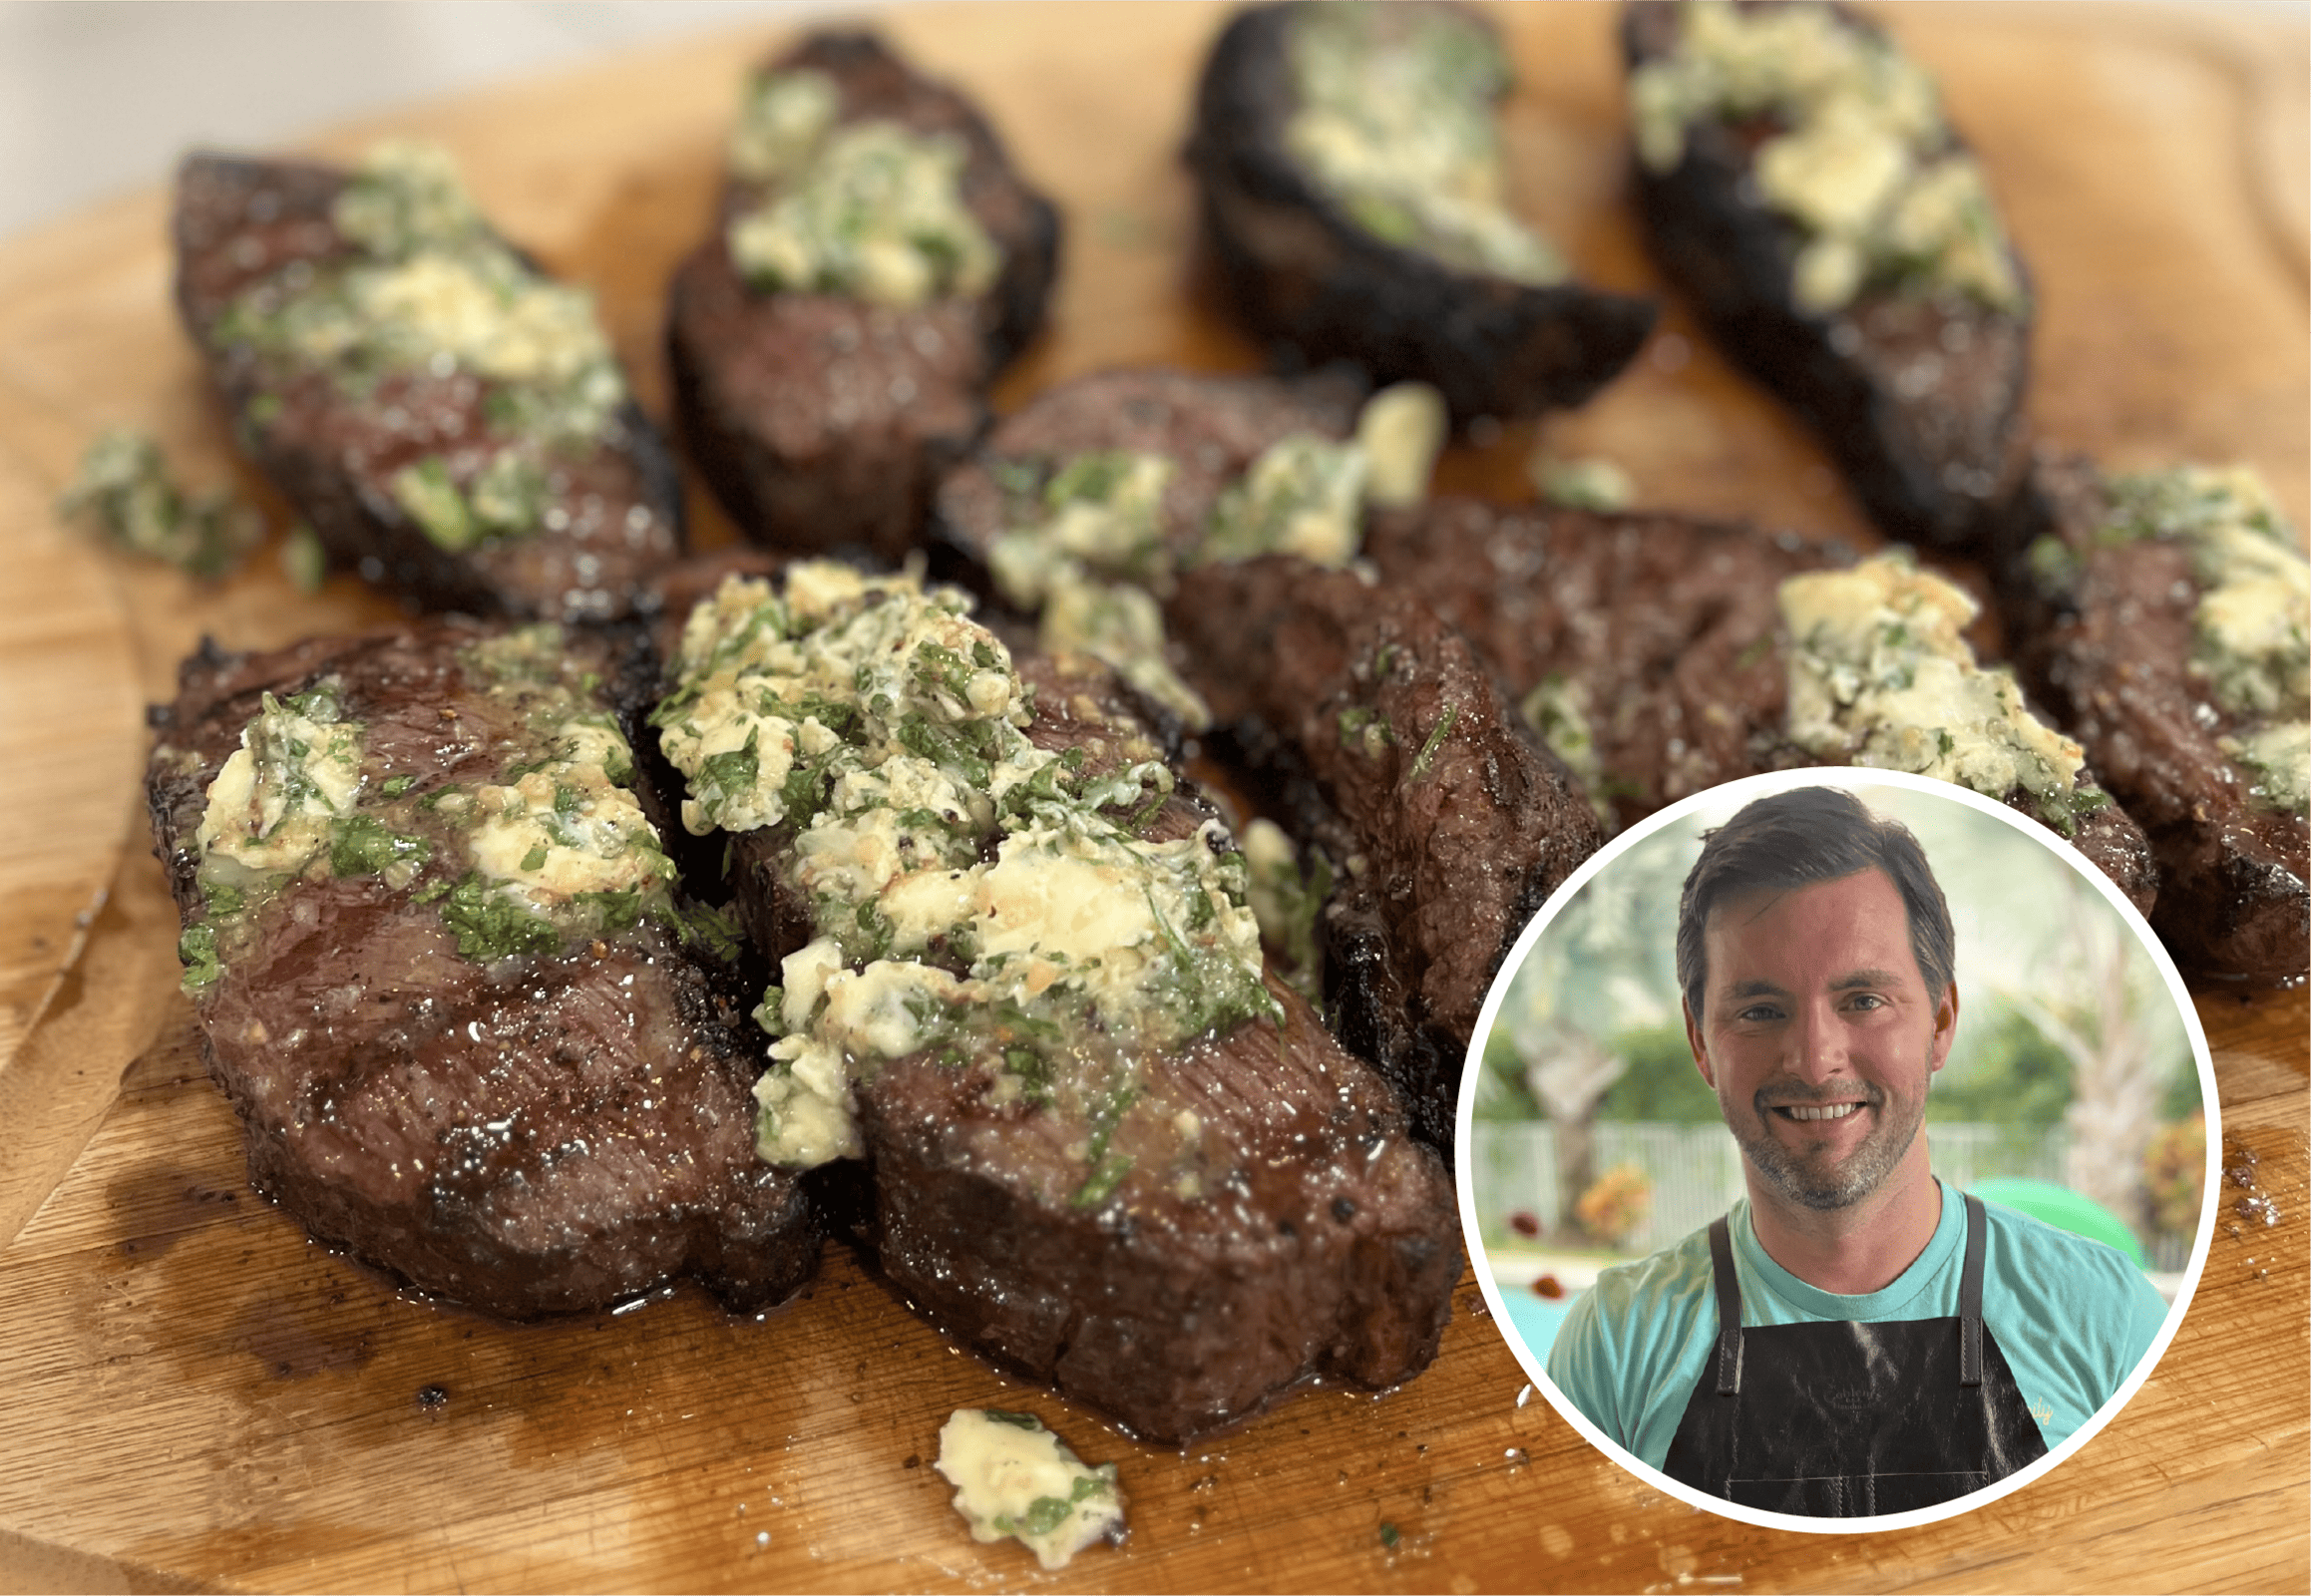 Chad Milam's Grilled Picanha